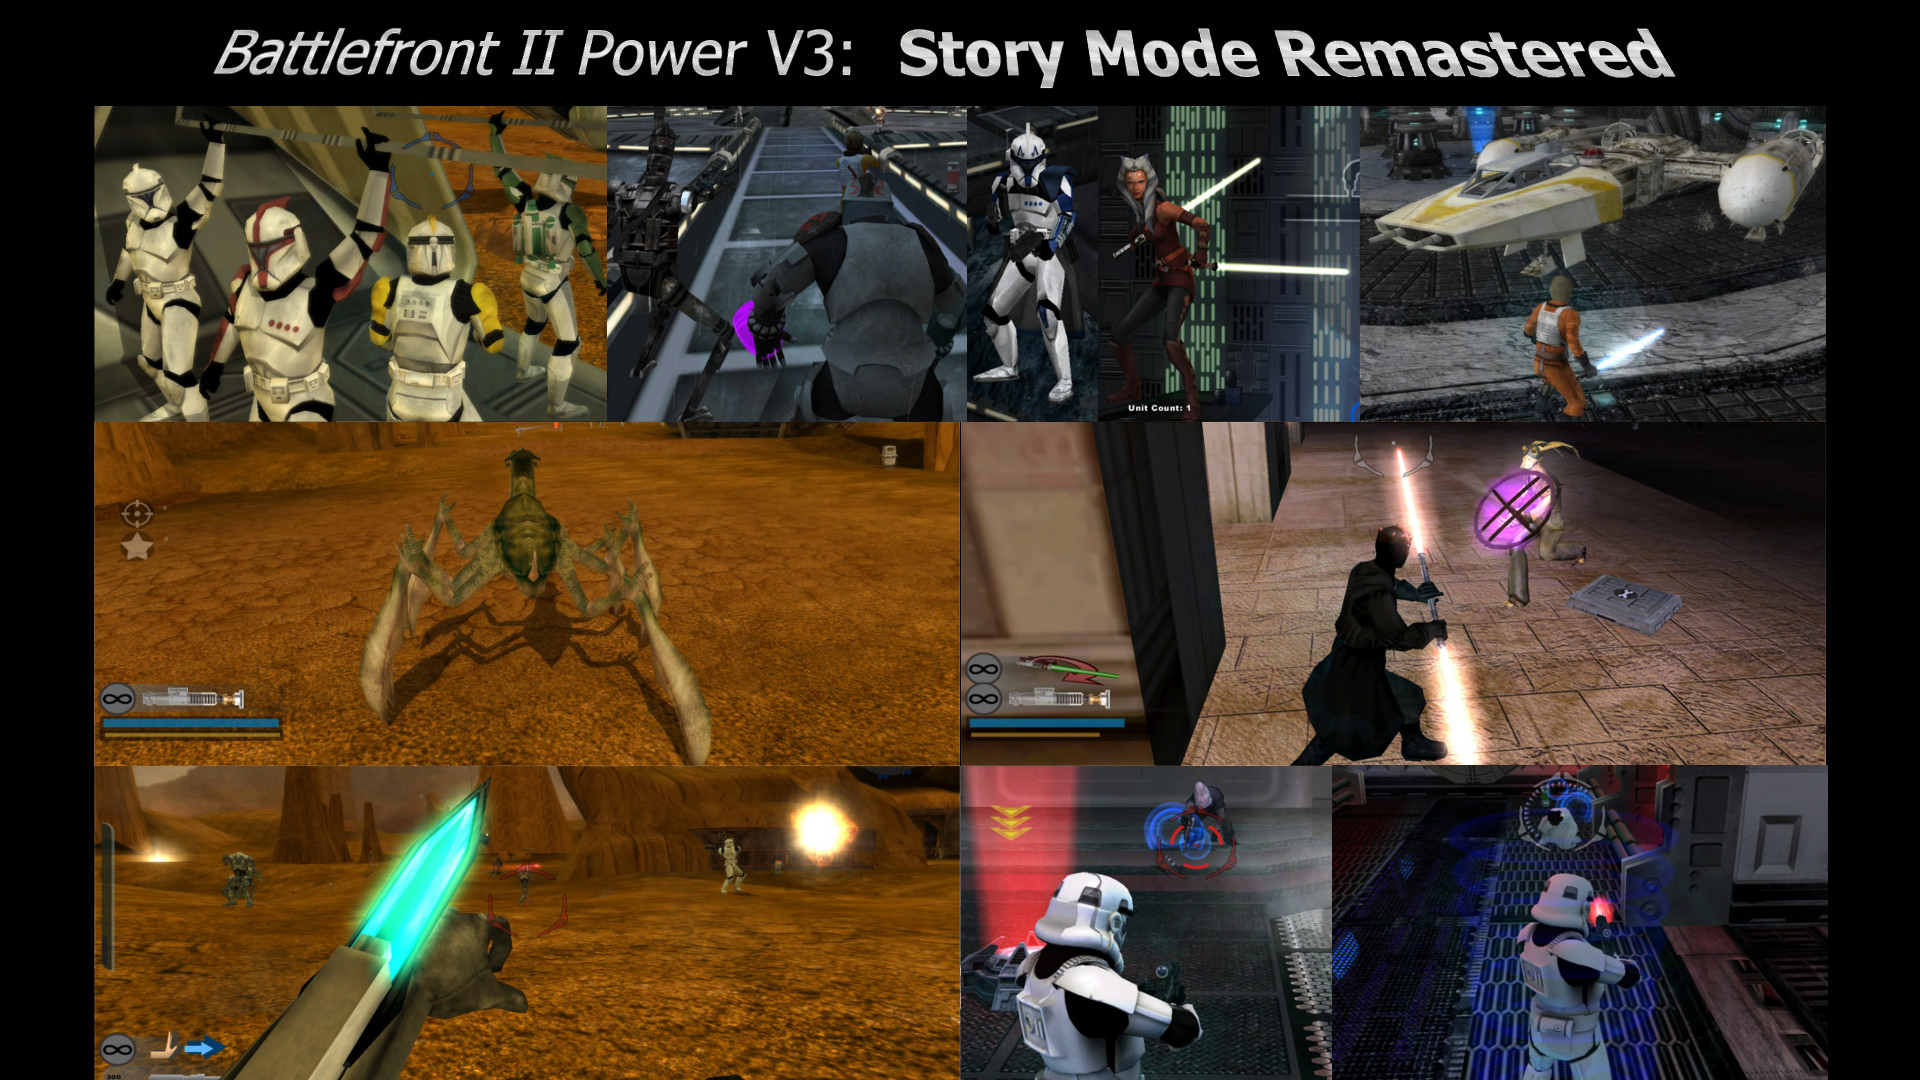 Steam Community :: Guide :: The Greatest Mods For SWBF2